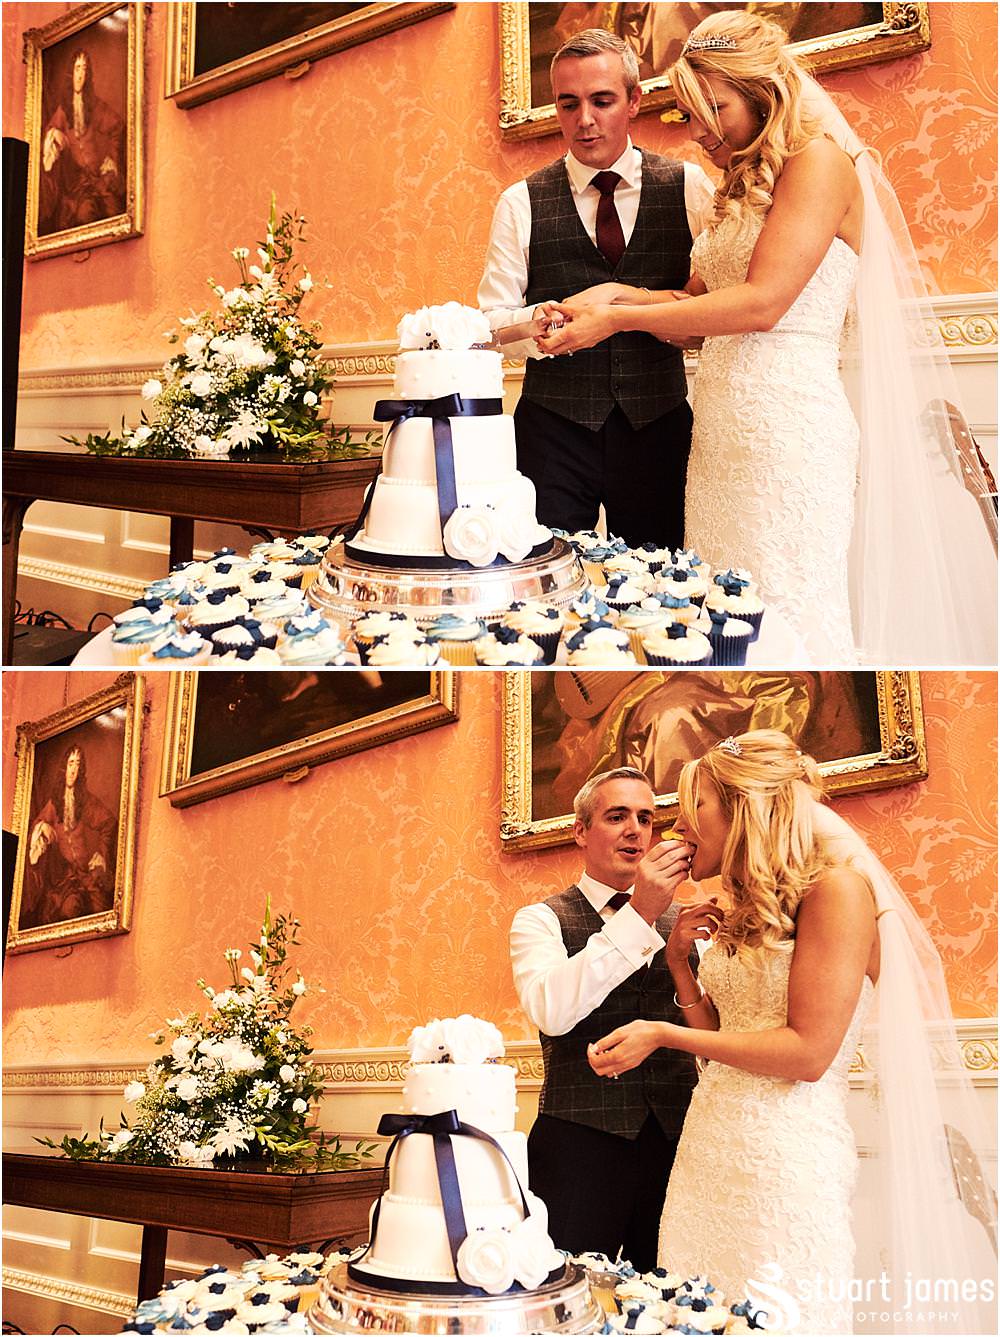 Cake cutting fun at Weston Park in Staffordshire by Documentary Wedding Photographer Stuart James